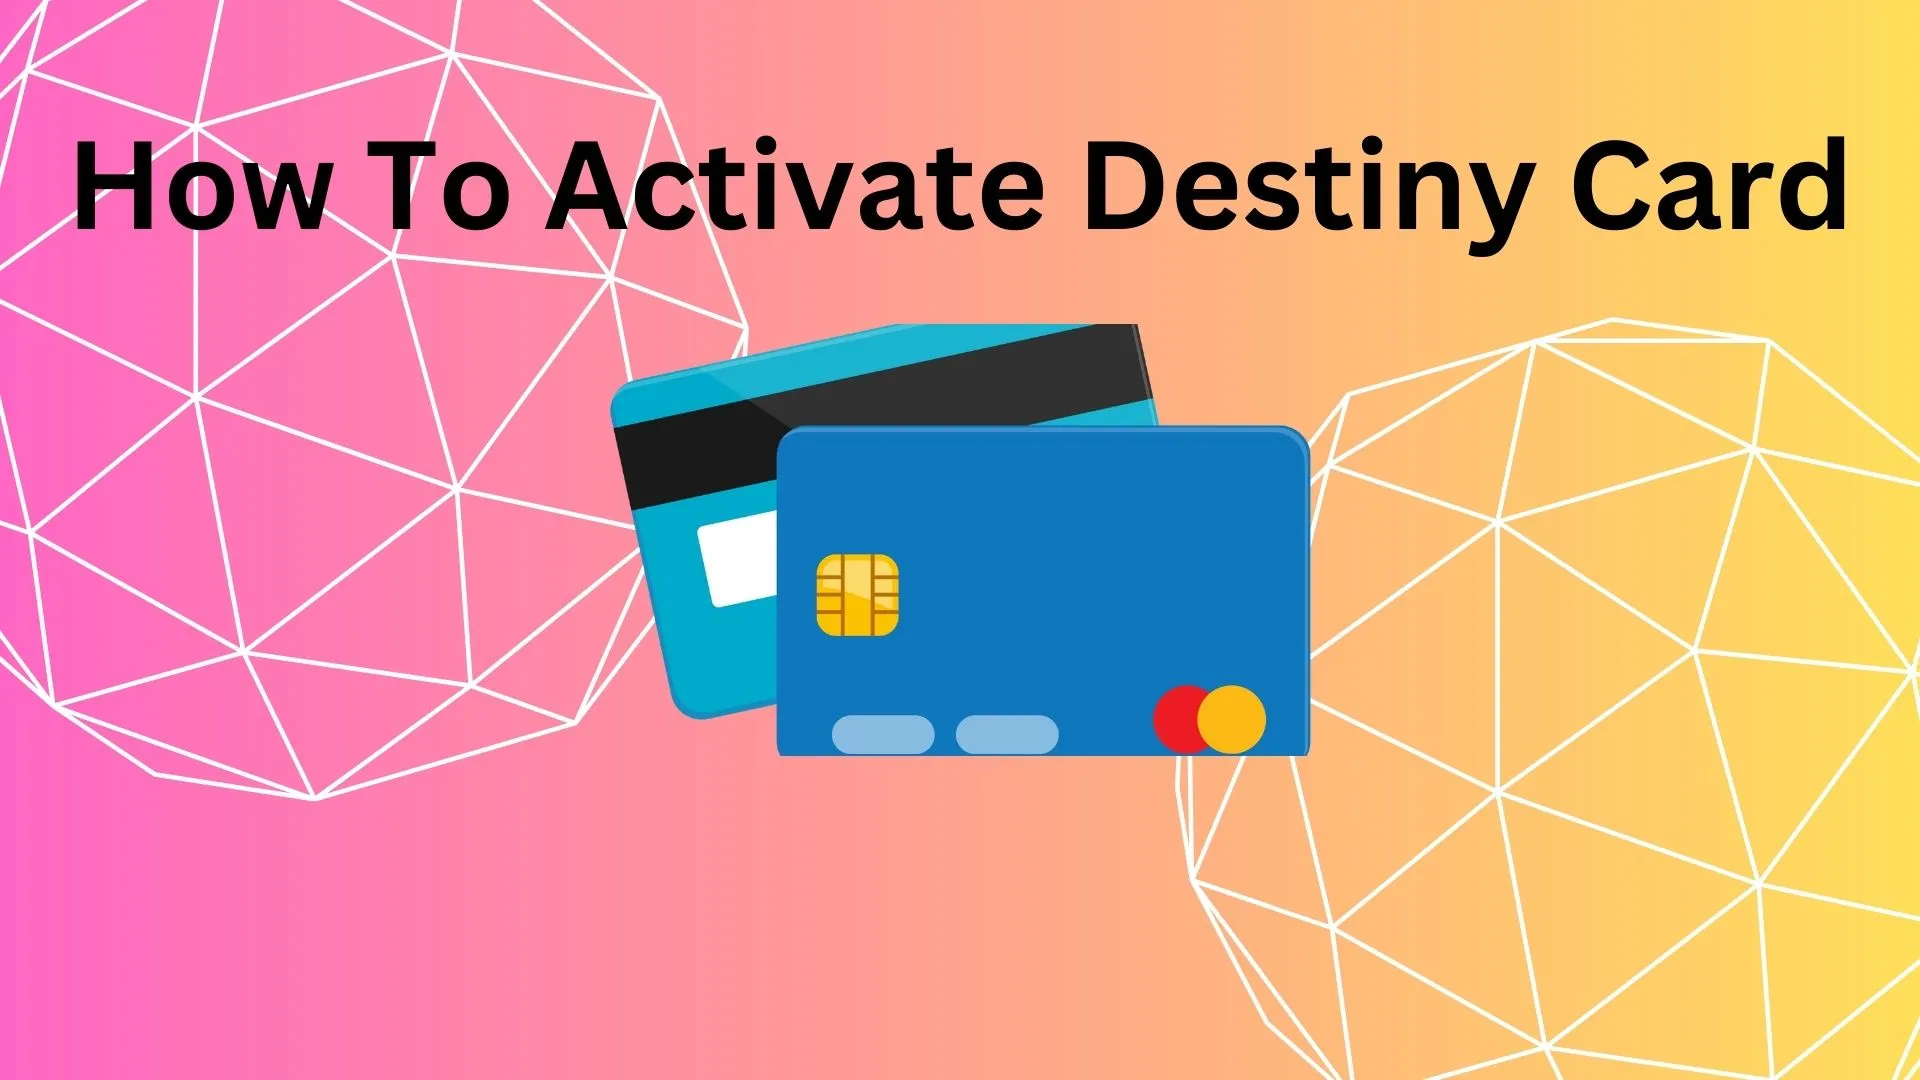 How To Activate Destiny Card